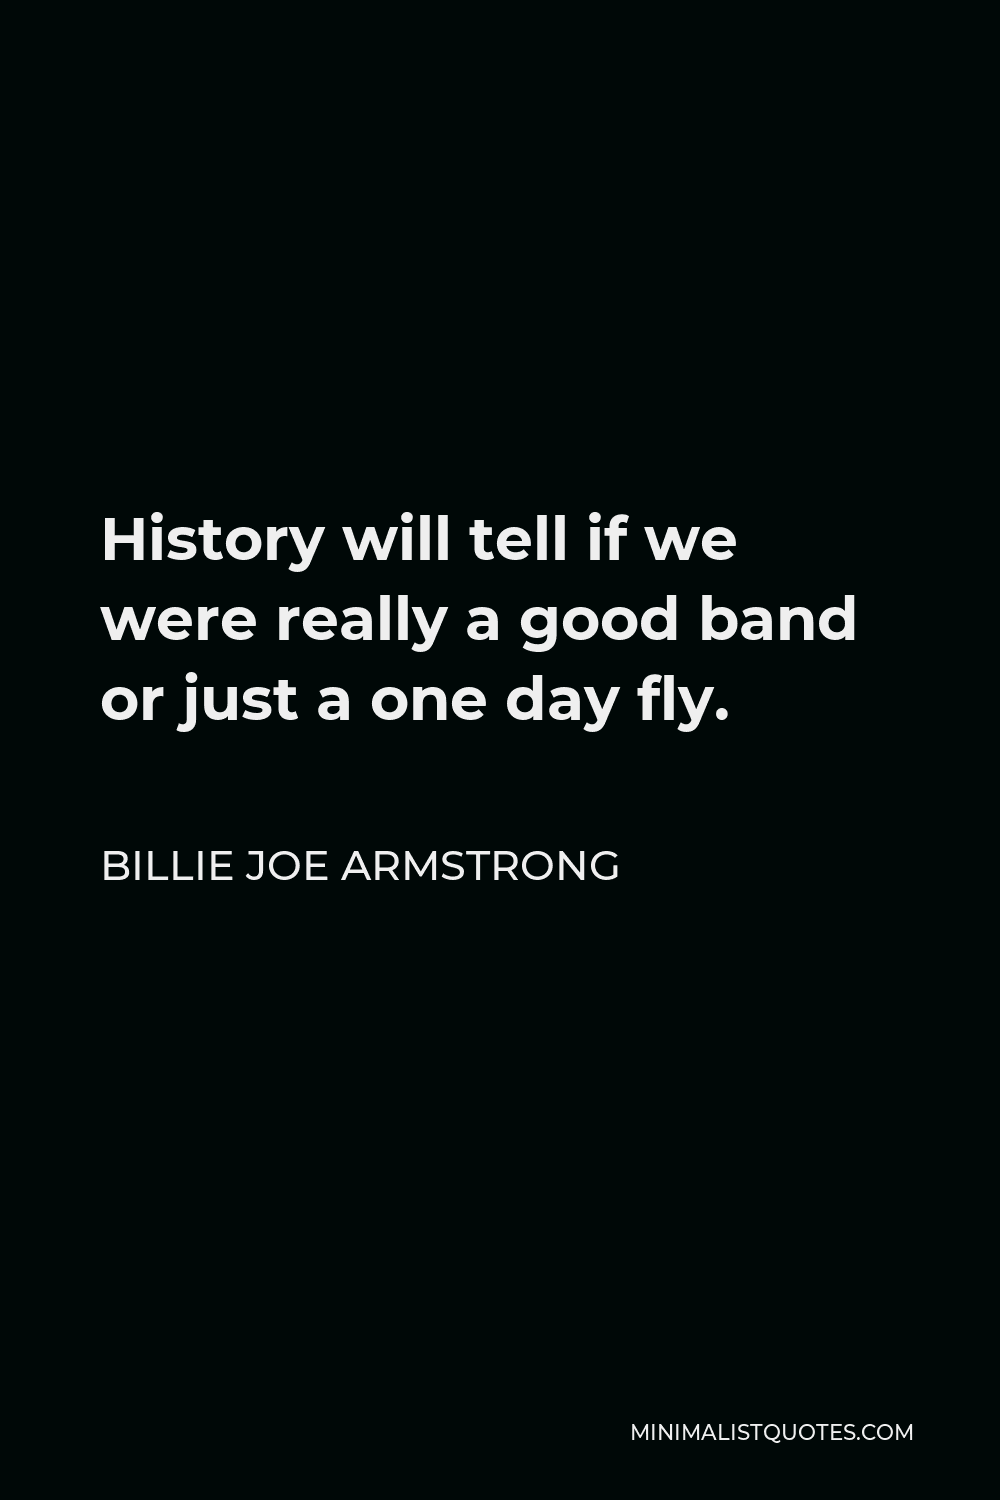 Billie Joe Armstrong Quote - History will tell if we were really a good band or just a one day fly.